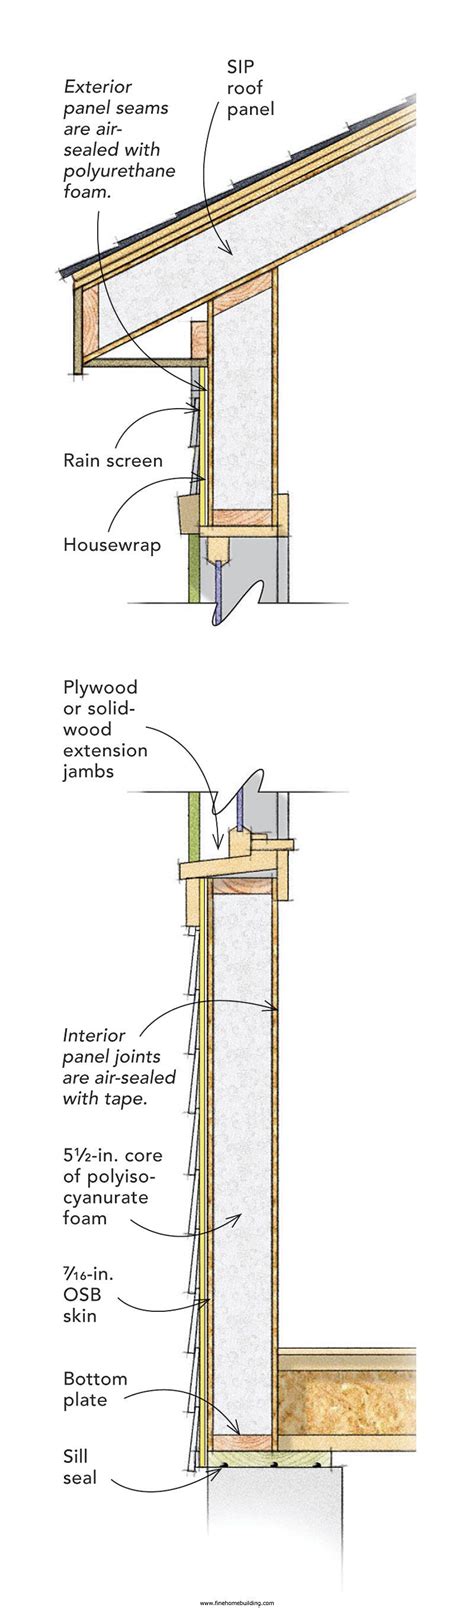 how to add a window to sip panel gable wall